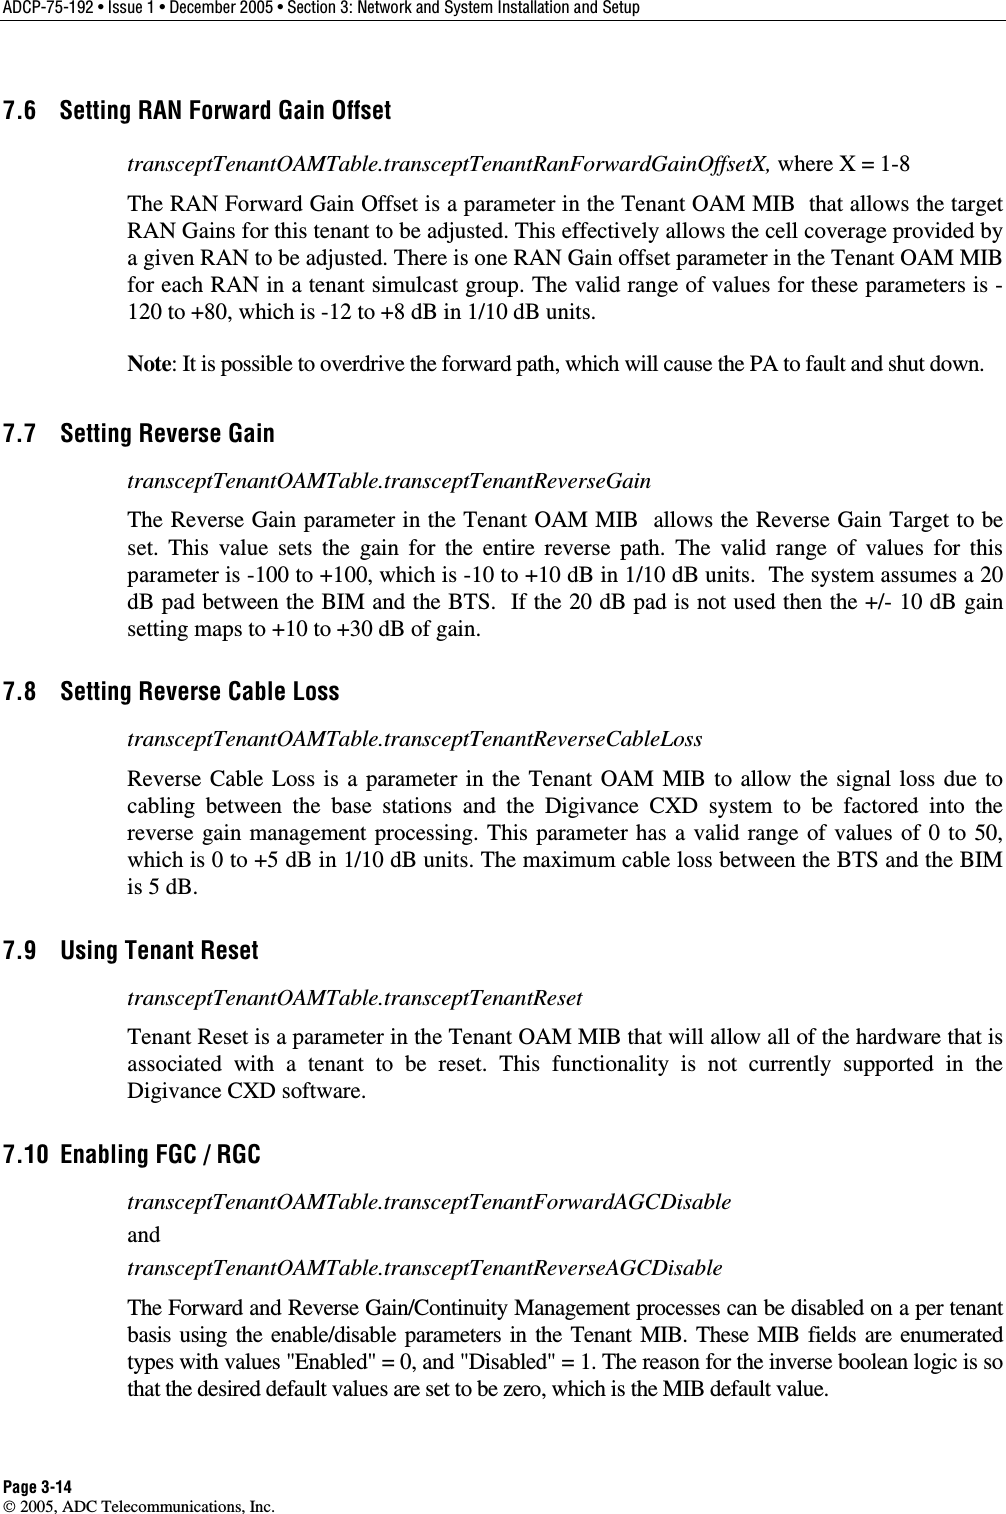 ADCP-75-192 • Issue 1 • December 2005 • Section 3: Network and System Installation and Setup Page 3-14  2005, ADC Telecommunications, Inc. 7.6  Setting RAN Forward Gain Offset transceptTenantOAMTable.transceptTenantRanForwardGainOffsetX, where X = 1-8 The RAN Forward Gain Offset is a parameter in the Tenant OAM MIB  that allows the target RAN Gains for this tenant to be adjusted. This effectively allows the cell coverage provided by a given RAN to be adjusted. There is one RAN Gain offset parameter in the Tenant OAM MIB for each RAN in a tenant simulcast group. The valid range of values for these parameters is -120 to +80, which is -12 to +8 dB in 1/10 dB units.  Note: It is possible to overdrive the forward path, which will cause the PA to fault and shut down. 7.7  Setting Reverse Gain transceptTenantOAMTable.transceptTenantReverseGain The Reverse Gain parameter in the Tenant OAM MIB  allows the Reverse Gain Target to be set. This value sets the gain for the entire reverse path. The valid range of values for this parameter is -100 to +100, which is -10 to +10 dB in 1/10 dB units.  The system assumes a 20 dB pad between the BIM and the BTS.  If the 20 dB pad is not used then the +/- 10 dB gain setting maps to +10 to +30 dB of gain. 7.8  Setting Reverse Cable Loss transceptTenantOAMTable.transceptTenantReverseCableLoss Reverse Cable Loss is a parameter in the Tenant OAM MIB to allow the signal loss due to cabling between the base stations and the Digivance CXD system to be factored into the reverse gain management processing. This parameter has a valid range of values of 0 to 50, which is 0 to +5 dB in 1/10 dB units. The maximum cable loss between the BTS and the BIM is 5 dB.  7.9  Using Tenant Reset transceptTenantOAMTable.transceptTenantReset Tenant Reset is a parameter in the Tenant OAM MIB that will allow all of the hardware that is associated with a tenant to be reset. This functionality is not currently supported in the Digivance CXD software. 7.10  Enabling FGC / RGC transceptTenantOAMTable.transceptTenantForwardAGCDisable and transceptTenantOAMTable.transceptTenantReverseAGCDisable The Forward and Reverse Gain/Continuity Management processes can be disabled on a per tenant basis using the enable/disable parameters in the Tenant MIB. These MIB fields are enumerated types with values &quot;Enabled&quot; = 0, and &quot;Disabled&quot; = 1. The reason for the inverse boolean logic is so that the desired default values are set to be zero, which is the MIB default value. 